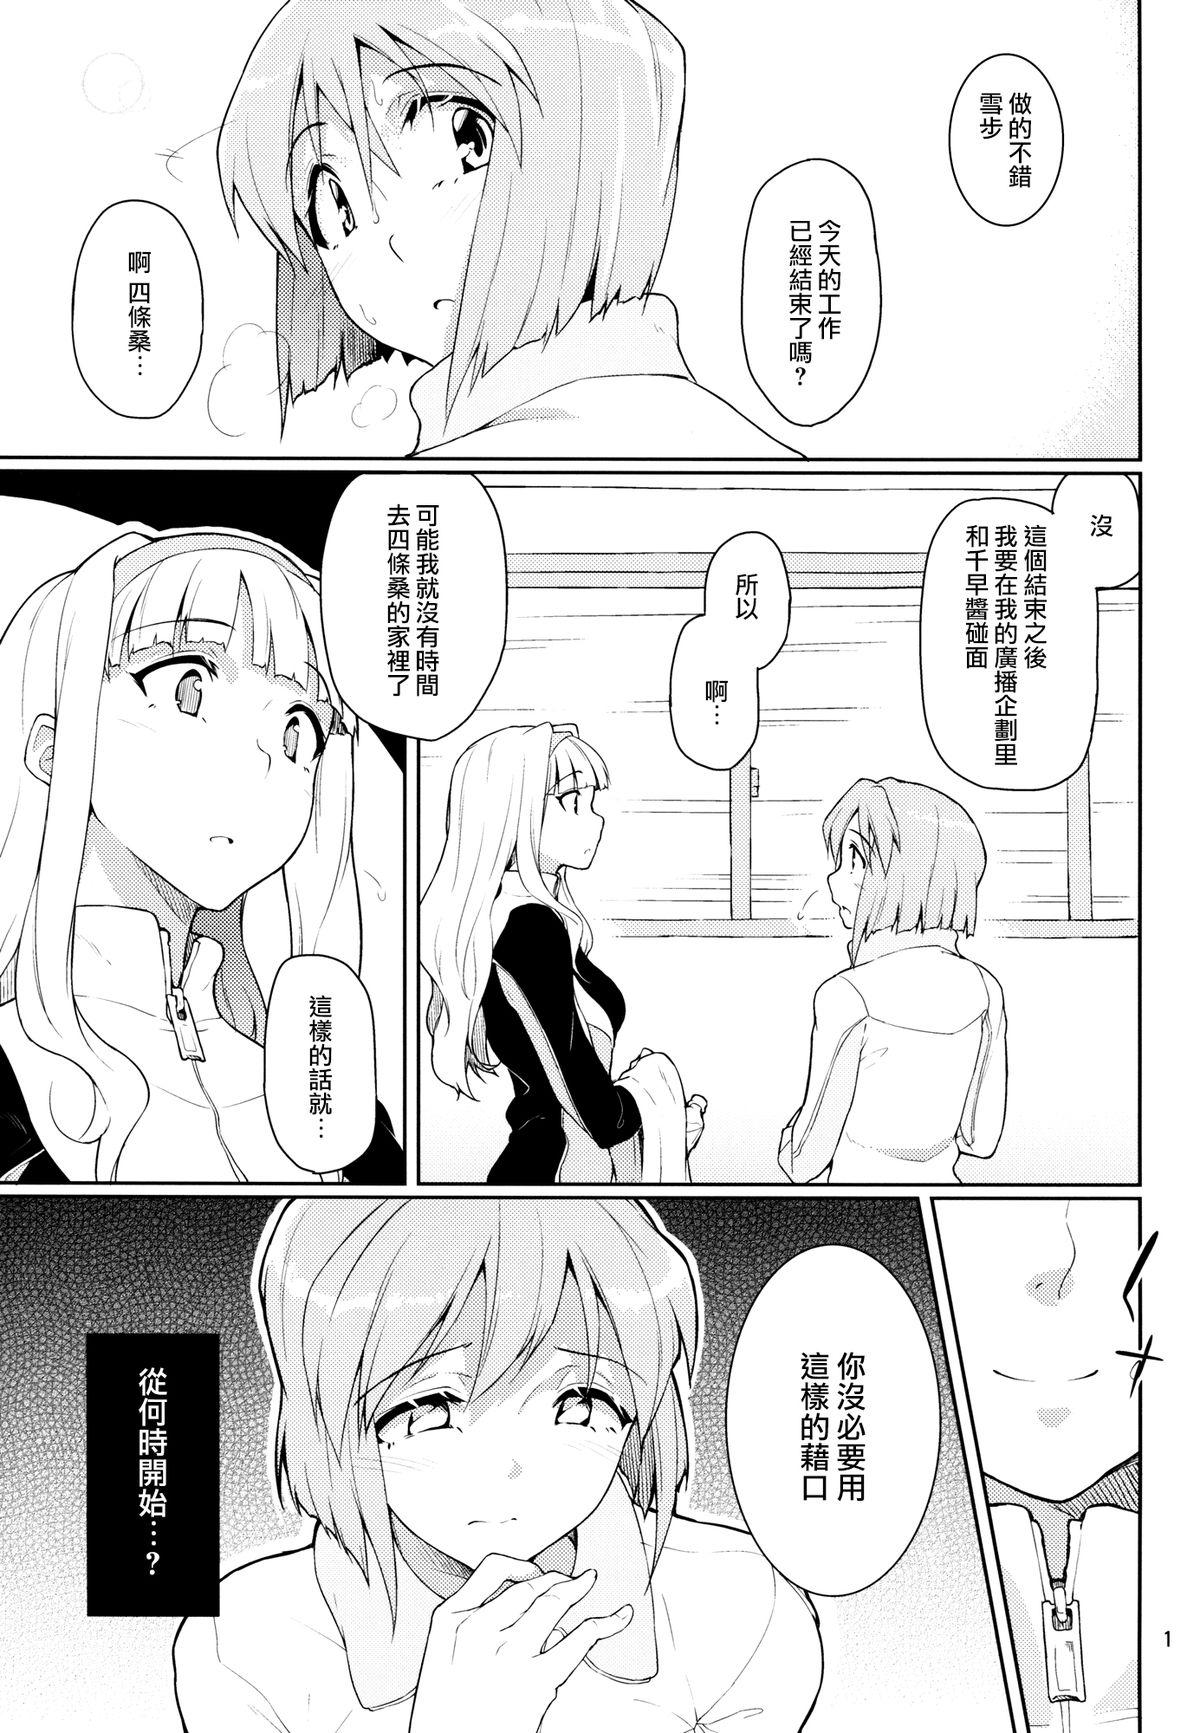 Costume Forbidden Fruit - The idolmaster Massages - Page 2